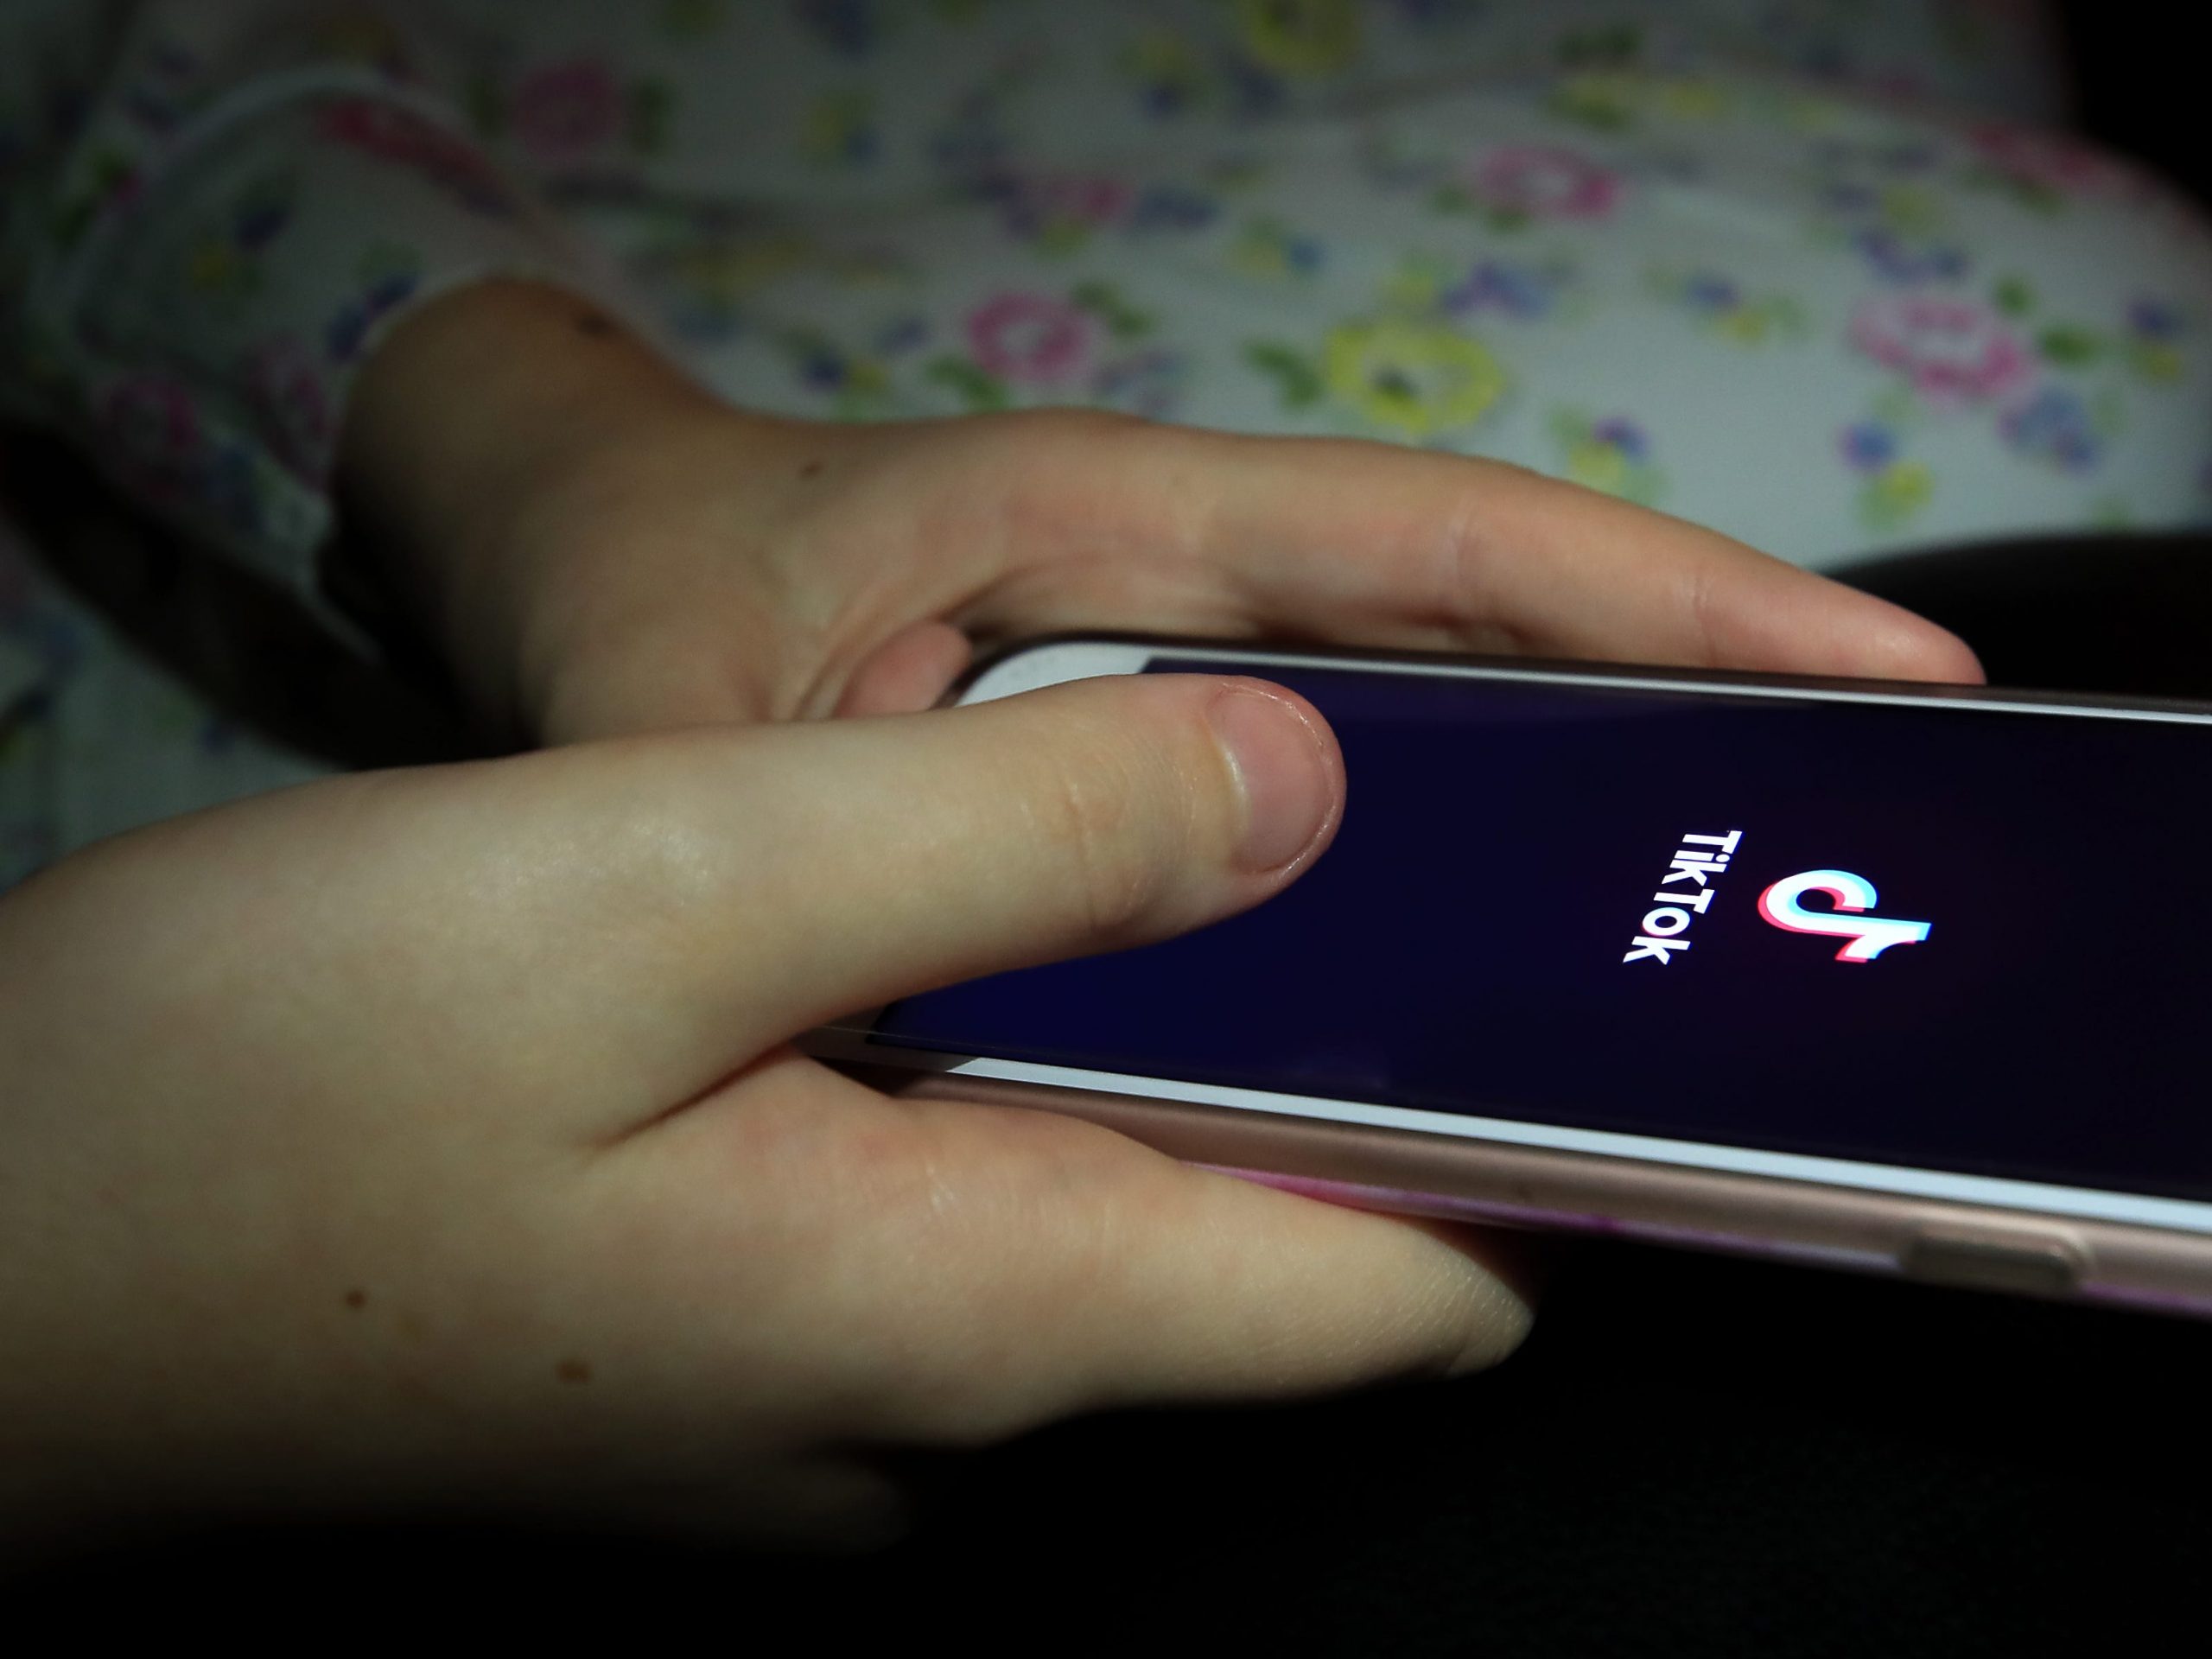 A young girl uses the TikTok app on a smartphone.